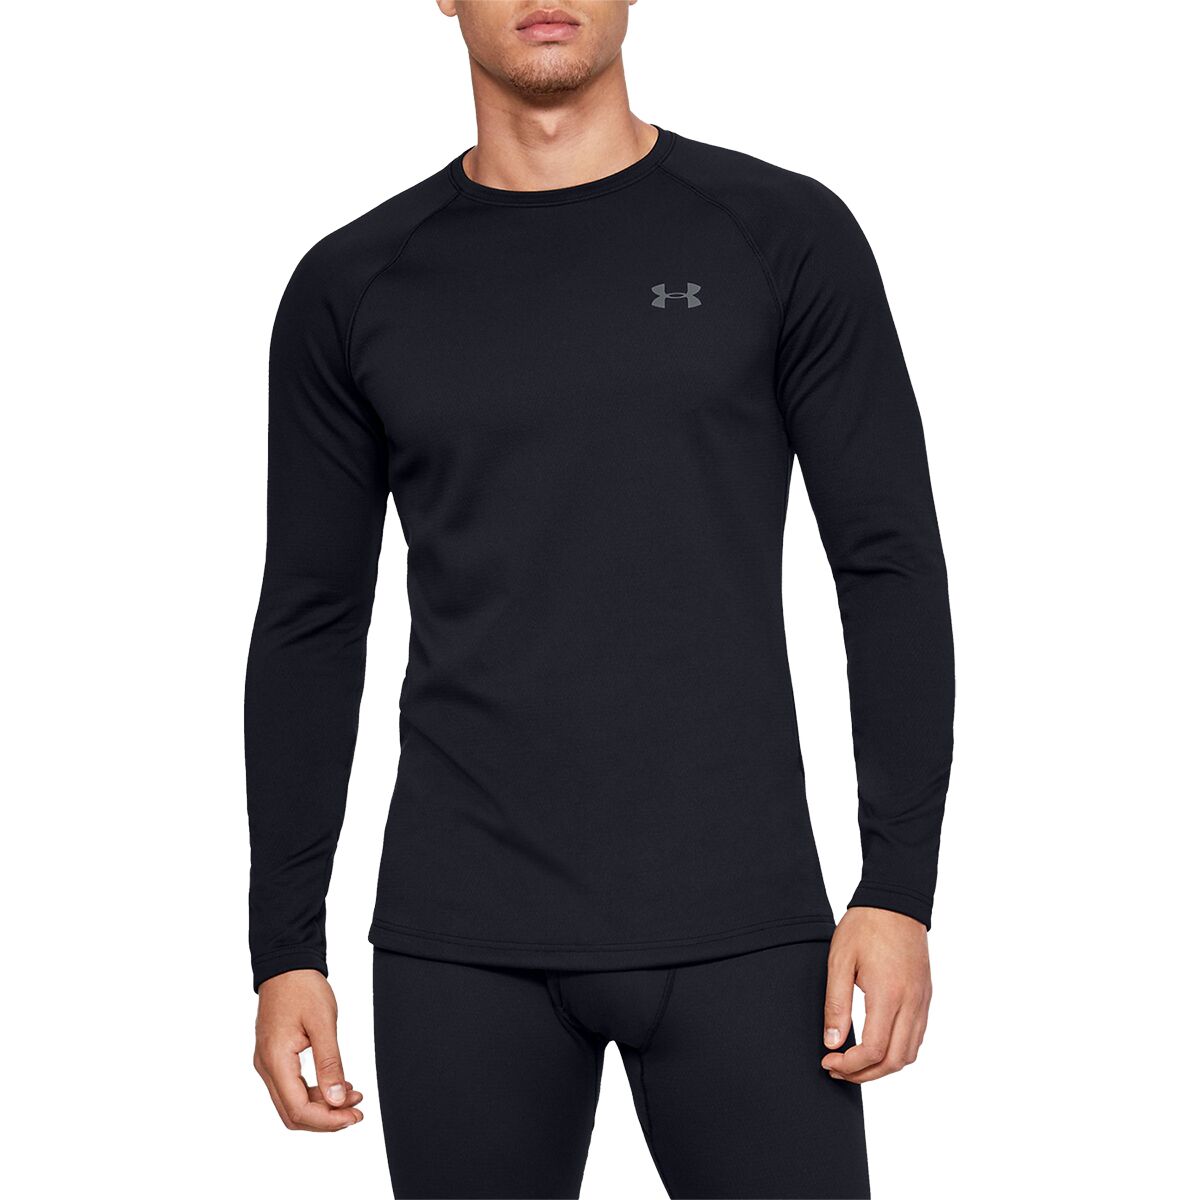 Under Armour Packaged Base 3.0 Hooded Top - Men's